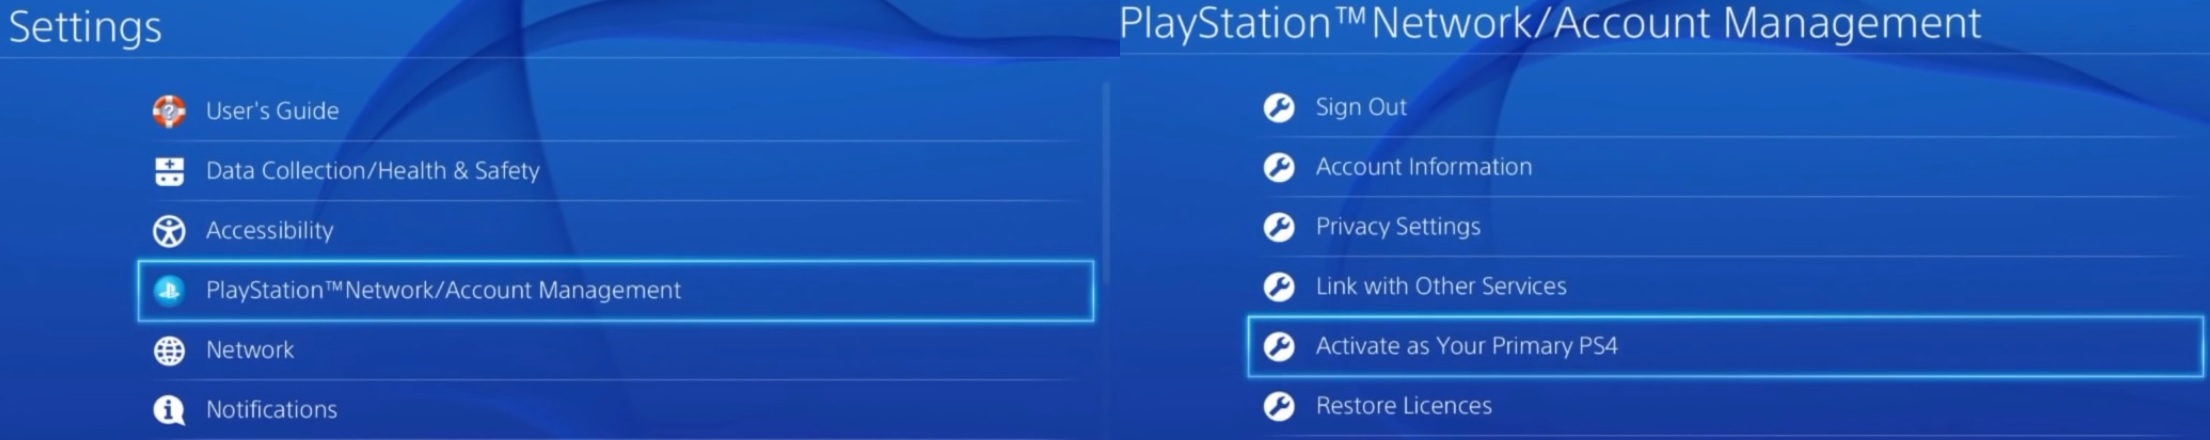 how to set ps4 as primary